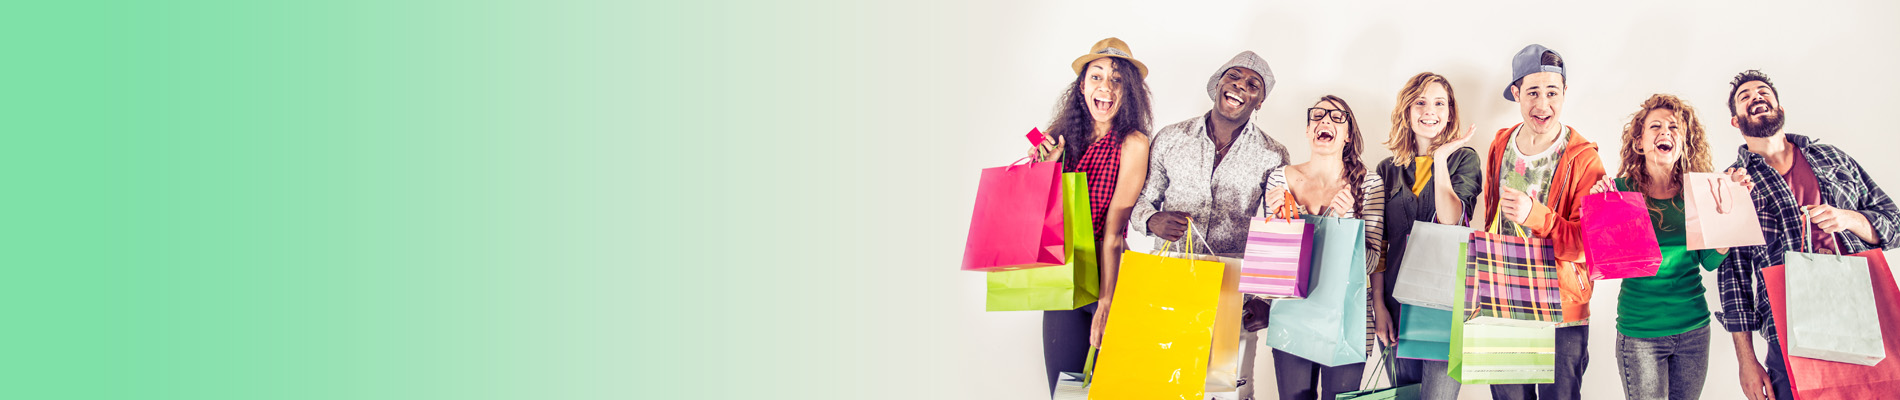 The 5 Most Common Shopper Personalities